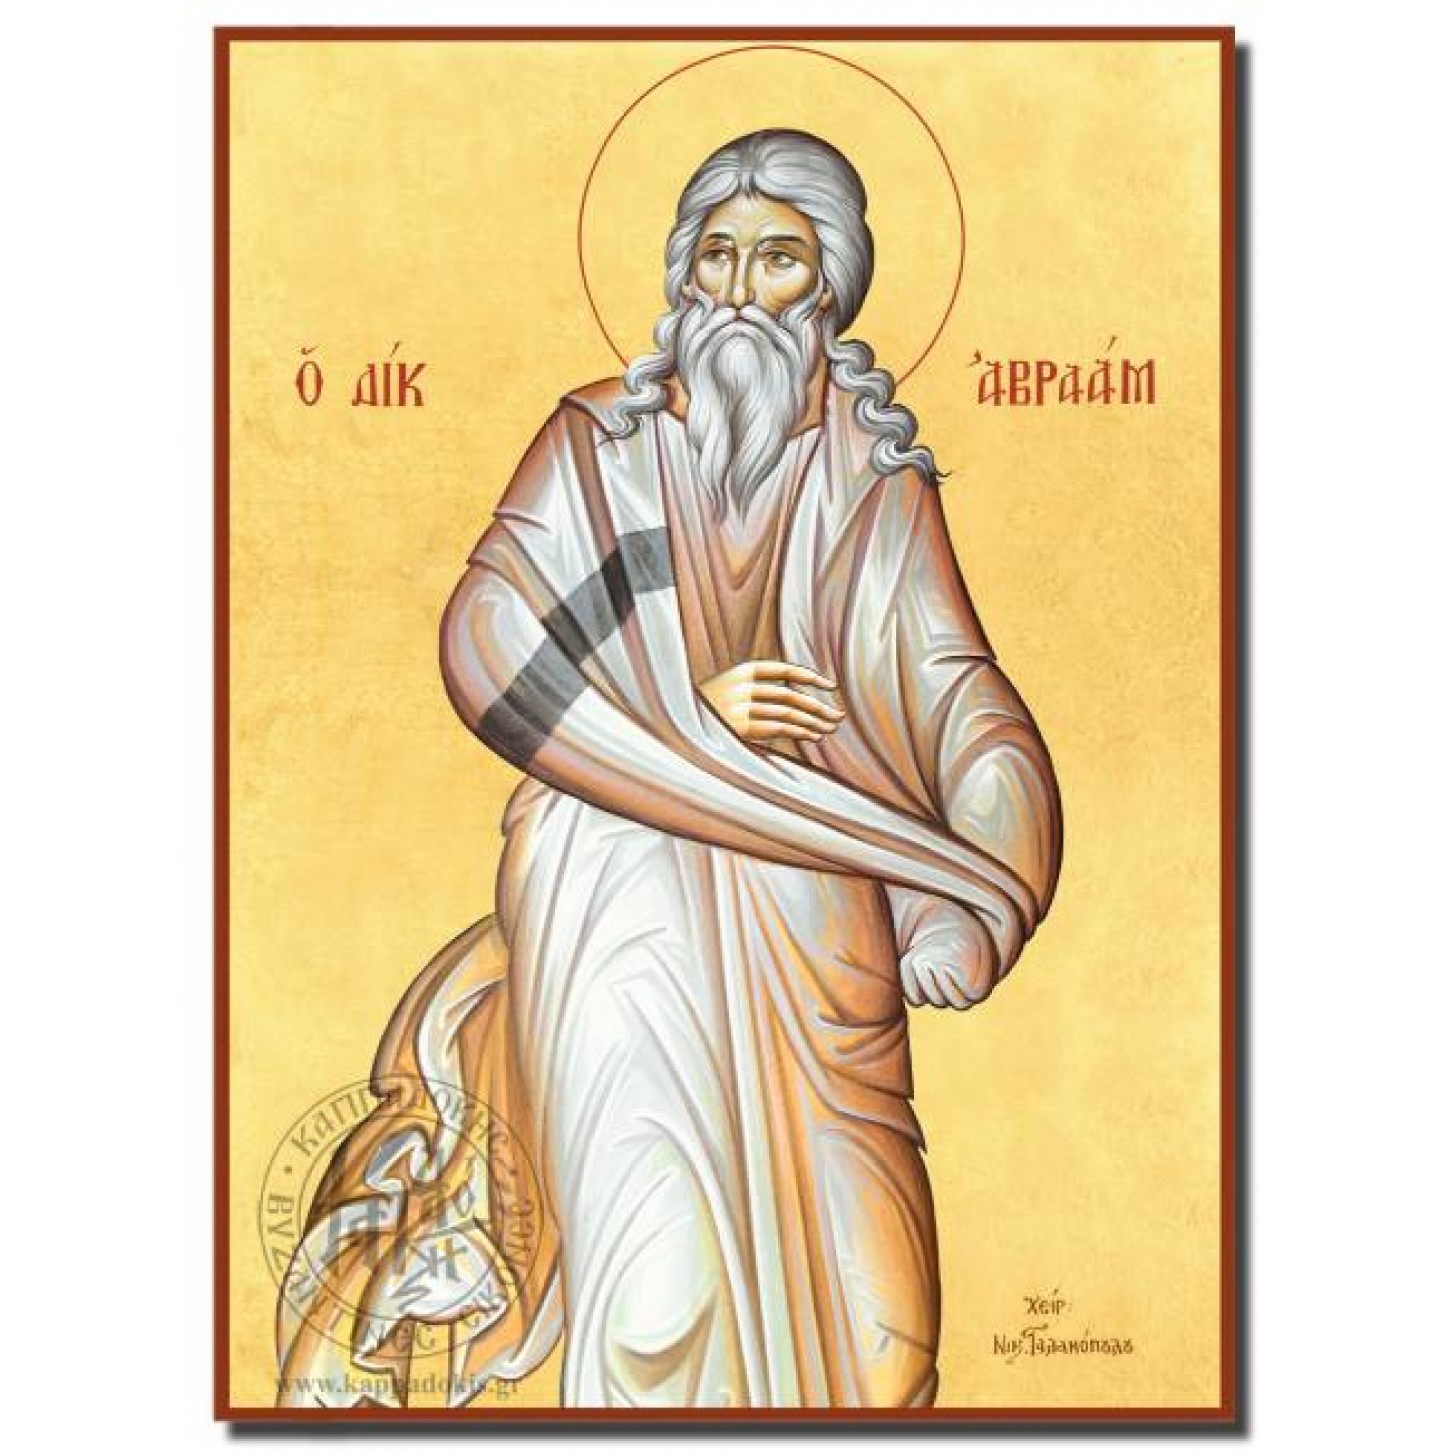 Abraham the Righteus